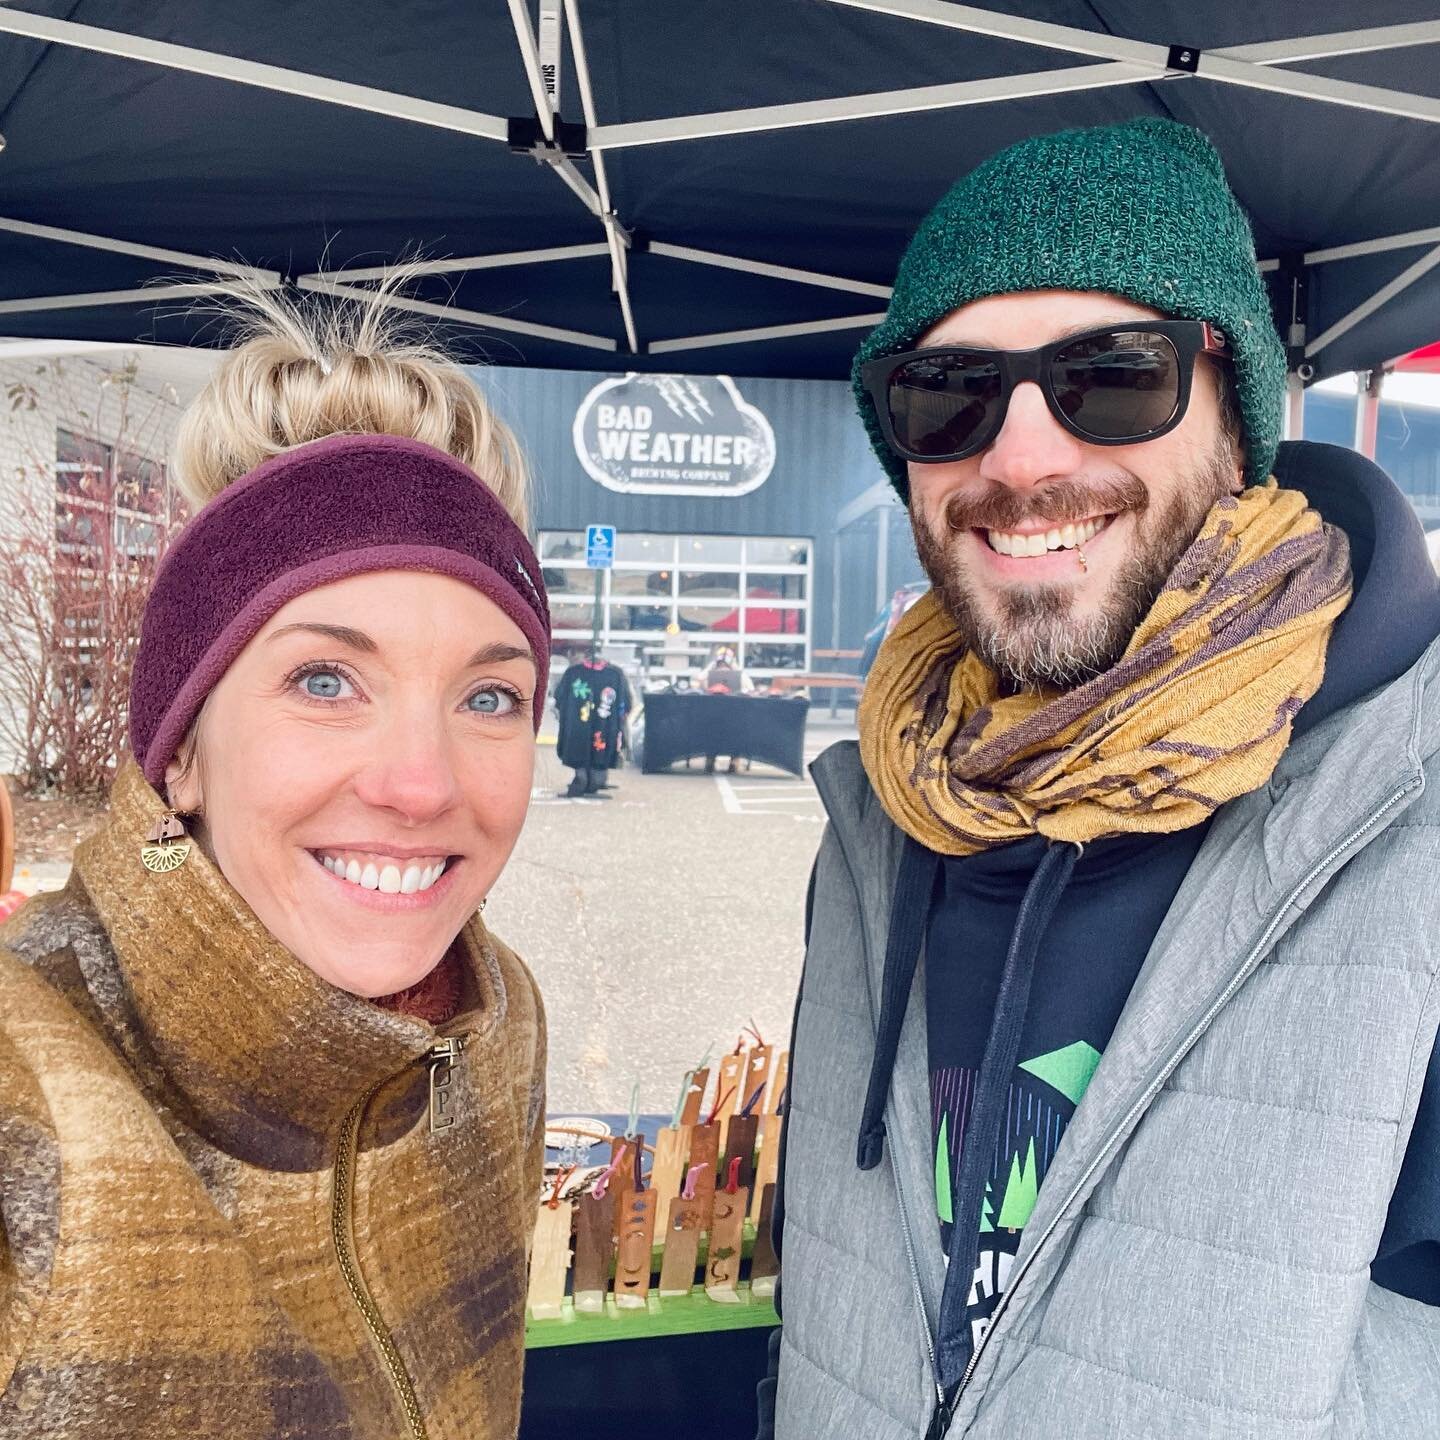 What a fun day at @badweatherbrew for Small Business Saturday! We had a great time seeing everyone and meeting new people! Never a bad day even in the chilly weather. Thanks to everyone who braved the cold - cheers! See you at our next event 🫶🏼
.
.